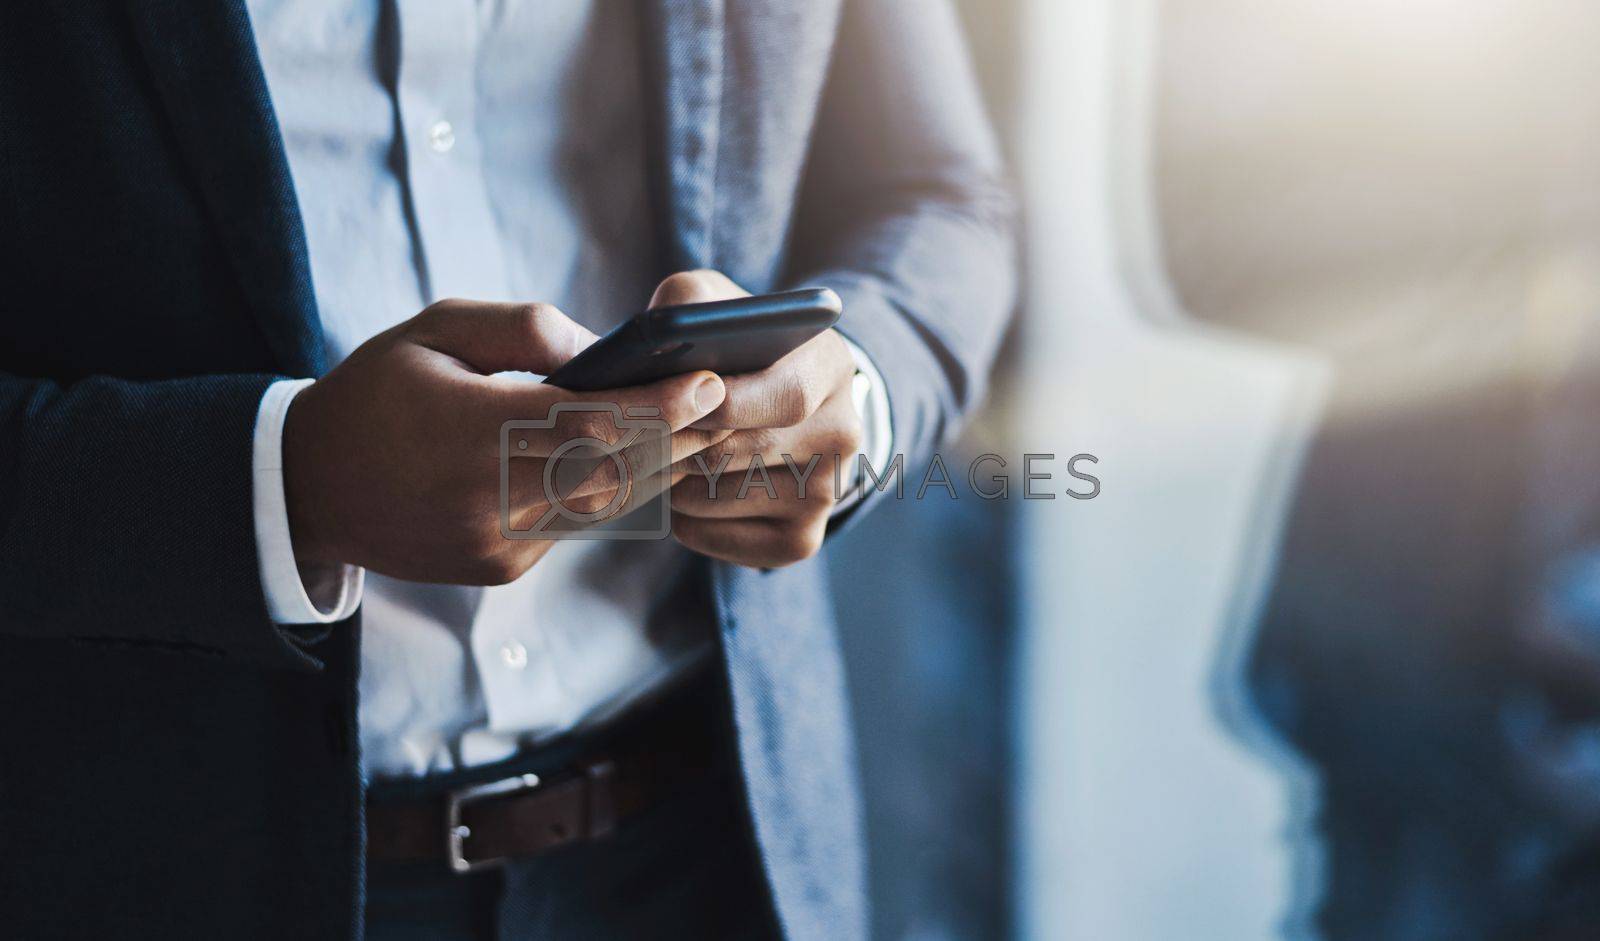 Communication is always key. Closeup shot of an unrecognizable businessman using a cellphone in an office